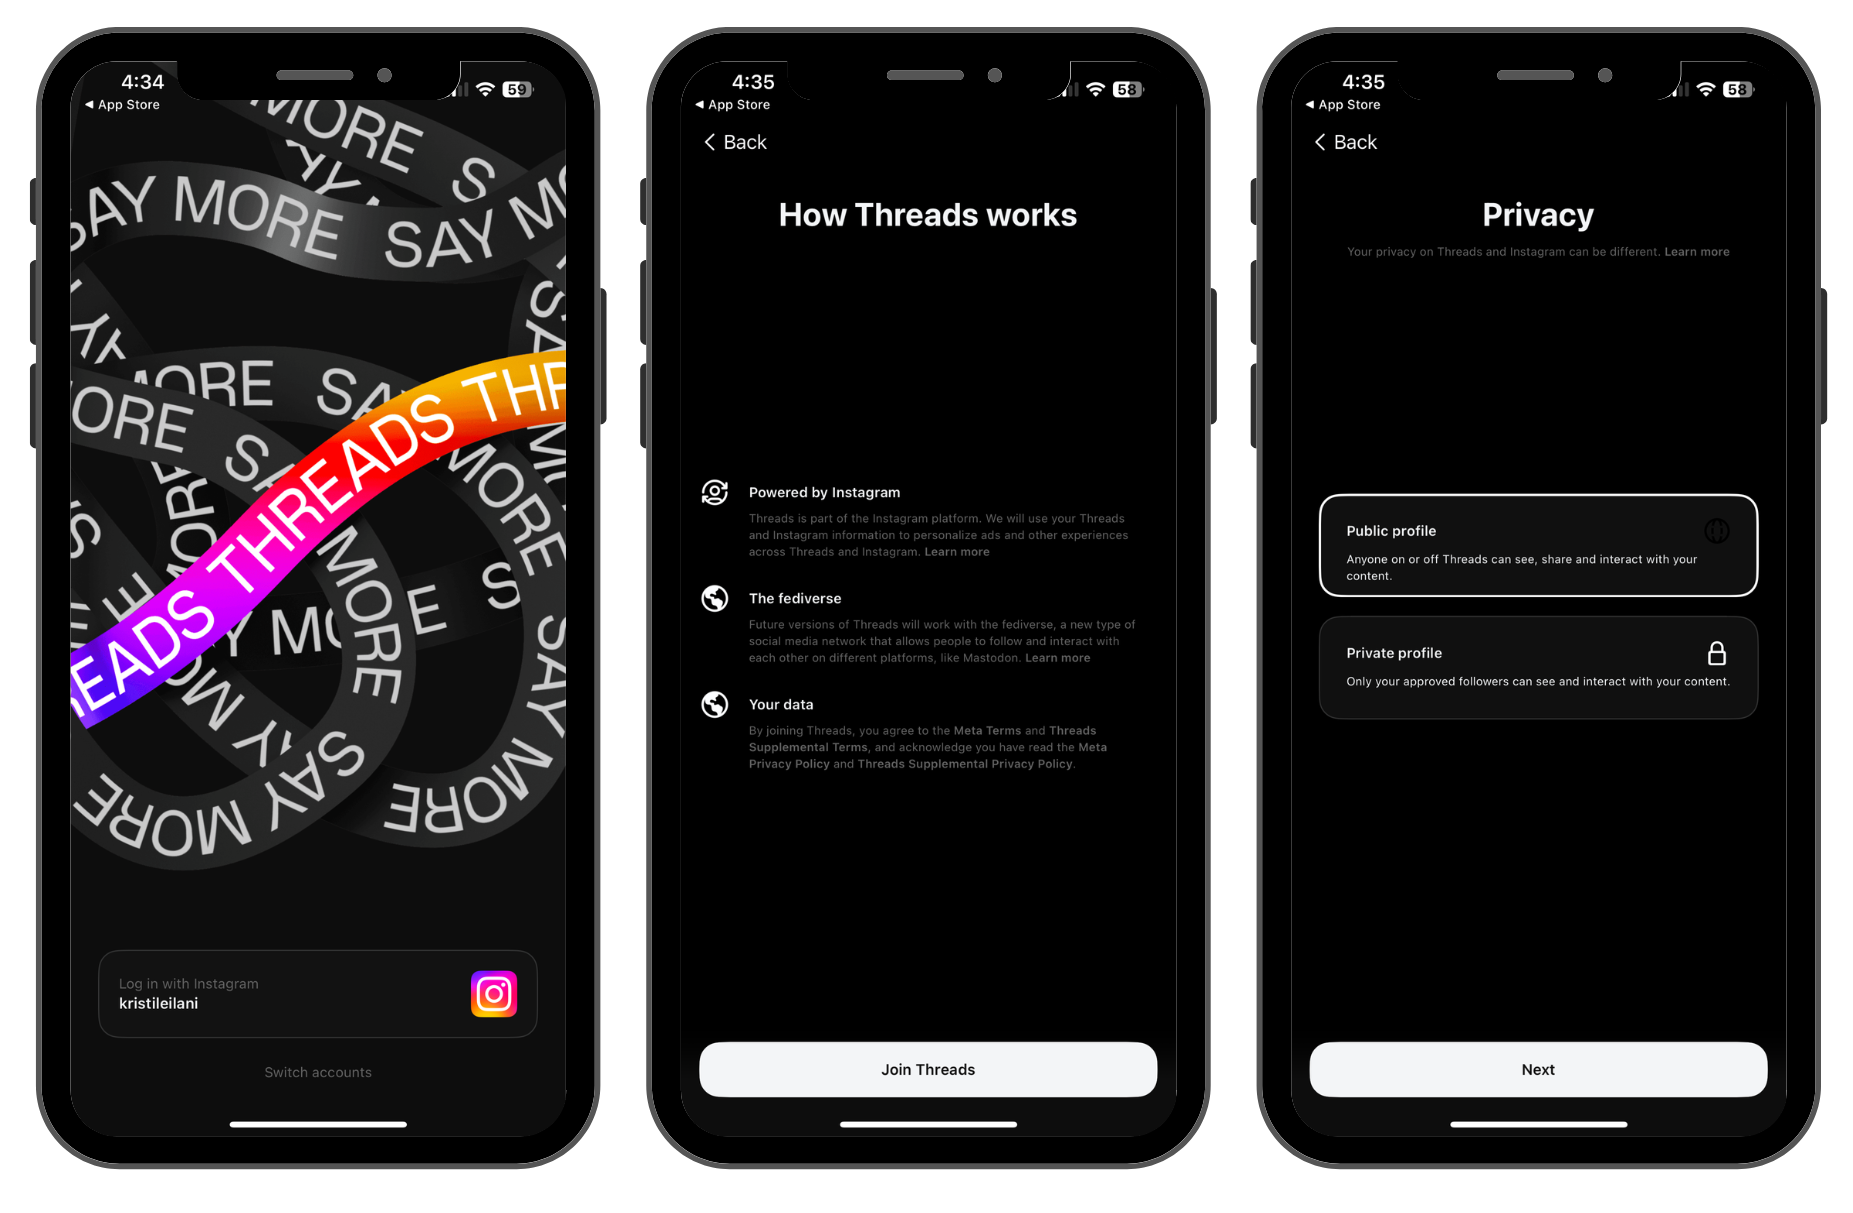 Threads App Reaches 100 Million Users In Under A Week, Sets New Record